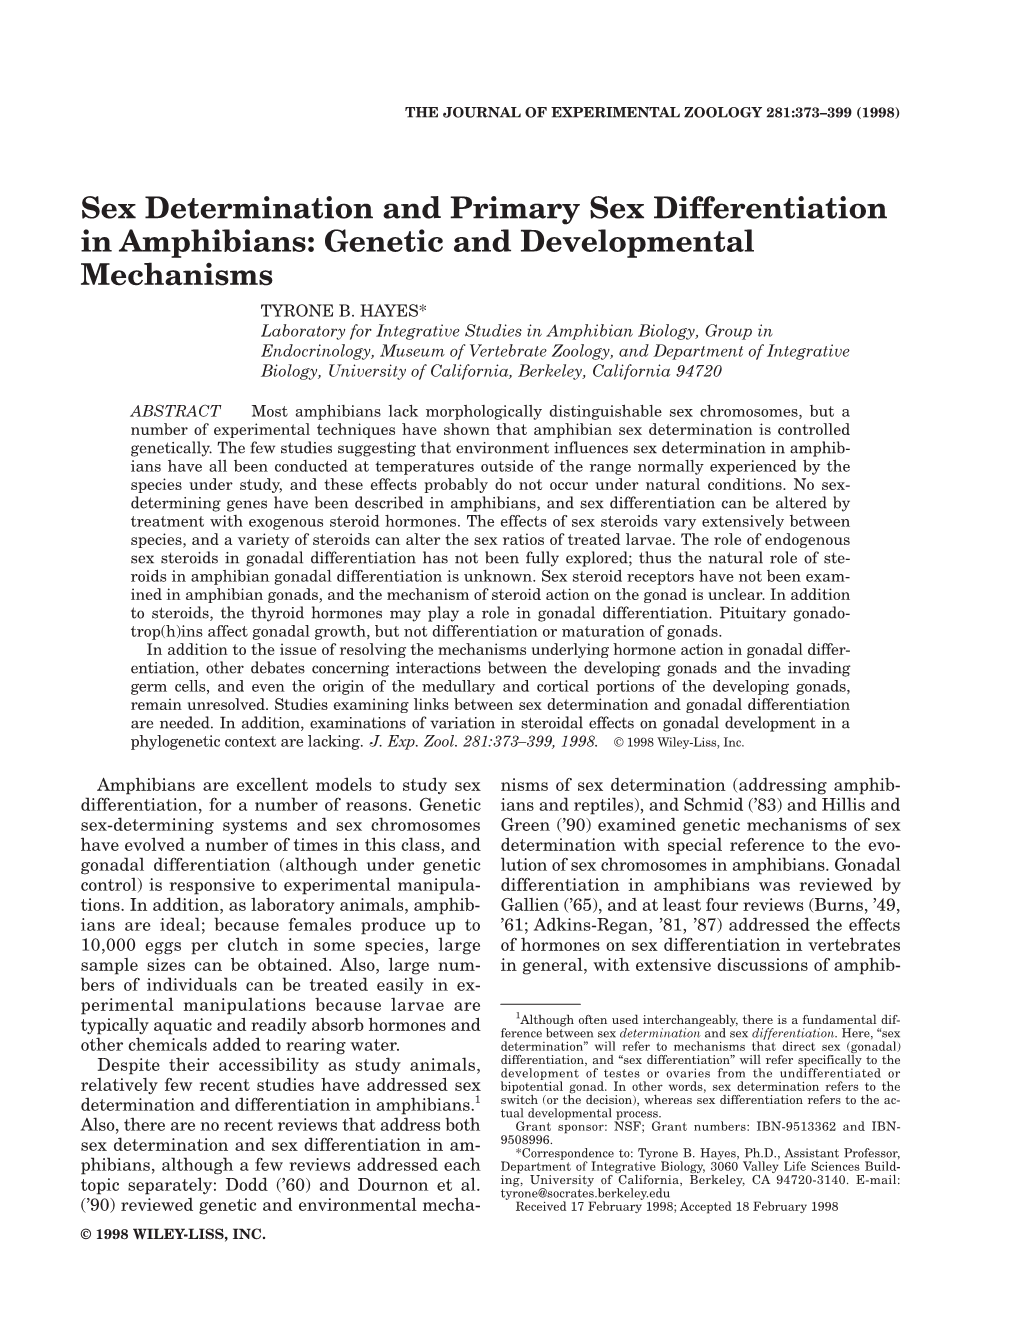 Sex Determination and Primary Sex Differentiation in Amphibians: Genetic and Developmental Mechanisms TYRONE B